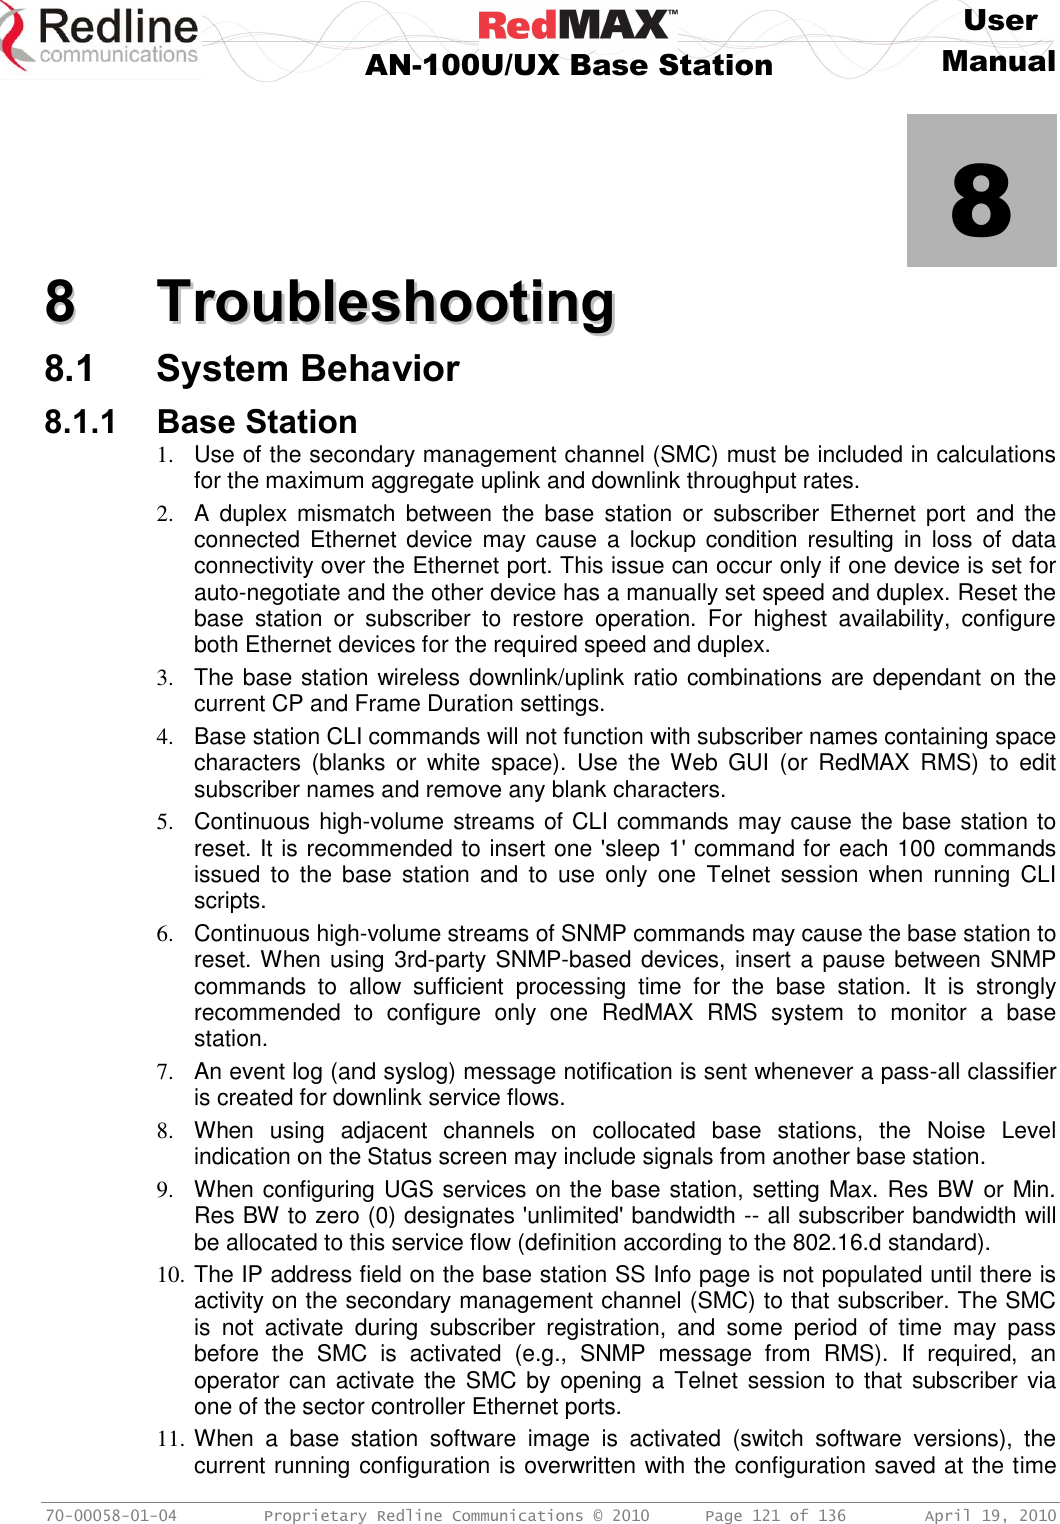     User  AN-100U/UX Base Station Manual   70-00058-01-04  Proprietary Redline Communications © 2010   Page 121 of 136  April 19, 2010            8 88  TTrroouubblleesshhoooottiinngg  8.1 System Behavior 8.1.1 Base Station 1.  Use of the secondary management channel (SMC) must be included in calculations for the maximum aggregate uplink and downlink throughput rates. 2.  A  duplex  mismatch  between  the  base  station  or  subscriber  Ethernet  port  and  the connected Ethernet device  may  cause  a  lockup condition  resulting in  loss of  data connectivity over the Ethernet port. This issue can occur only if one device is set for auto-negotiate and the other device has a manually set speed and duplex. Reset the base  station  or  subscriber  to  restore  operation.  For  highest  availability,  configure both Ethernet devices for the required speed and duplex. 3.  The base station wireless downlink/uplink ratio combinations are dependant on the current CP and Frame Duration settings. 4.  Base station CLI commands will not function with subscriber names containing space characters  (blanks  or  white  space).  Use  the Web  GUI  (or  RedMAX  RMS)  to  edit subscriber names and remove any blank characters. 5.  Continuous high-volume streams of CLI commands may cause the base station to reset. It is recommended to insert one &apos;sleep 1&apos; command for each 100 commands issued  to  the  base  station  and  to  use  only  one  Telnet  session  when  running  CLI scripts. 6.  Continuous high-volume streams of SNMP commands may cause the base station to reset. When using 3rd-party SNMP-based devices, insert a pause between SNMP commands  to  allow  sufficient  processing  time  for  the  base  station.  It  is  strongly recommended  to  configure  only  one  RedMAX  RMS  system  to  monitor  a  base station. 7.  An event log (and syslog) message notification is sent whenever a pass-all classifier is created for downlink service flows. 8.  When  using  adjacent  channels  on  collocated  base  stations,  the  Noise  Level indication on the Status screen may include signals from another base station. 9.  When configuring UGS services on the base station, setting Max. Res BW or Min. Res BW to zero (0) designates &apos;unlimited&apos; bandwidth -- all subscriber bandwidth will be allocated to this service flow (definition according to the 802.16.d standard). 10. The IP address field on the base station SS Info page is not populated until there is activity on the secondary management channel (SMC) to that subscriber. The SMC is  not  activate  during  subscriber  registration,  and  some  period  of  time  may  pass before  the  SMC  is  activated  (e.g.,  SNMP  message  from  RMS).  If  required,  an operator can activate the SMC by opening a  Telnet session to that subscriber via one of the sector controller Ethernet ports. 11. When  a  base  station  software  image  is  activated  (switch  software  versions),  the current running configuration is overwritten with the configuration saved at the time 